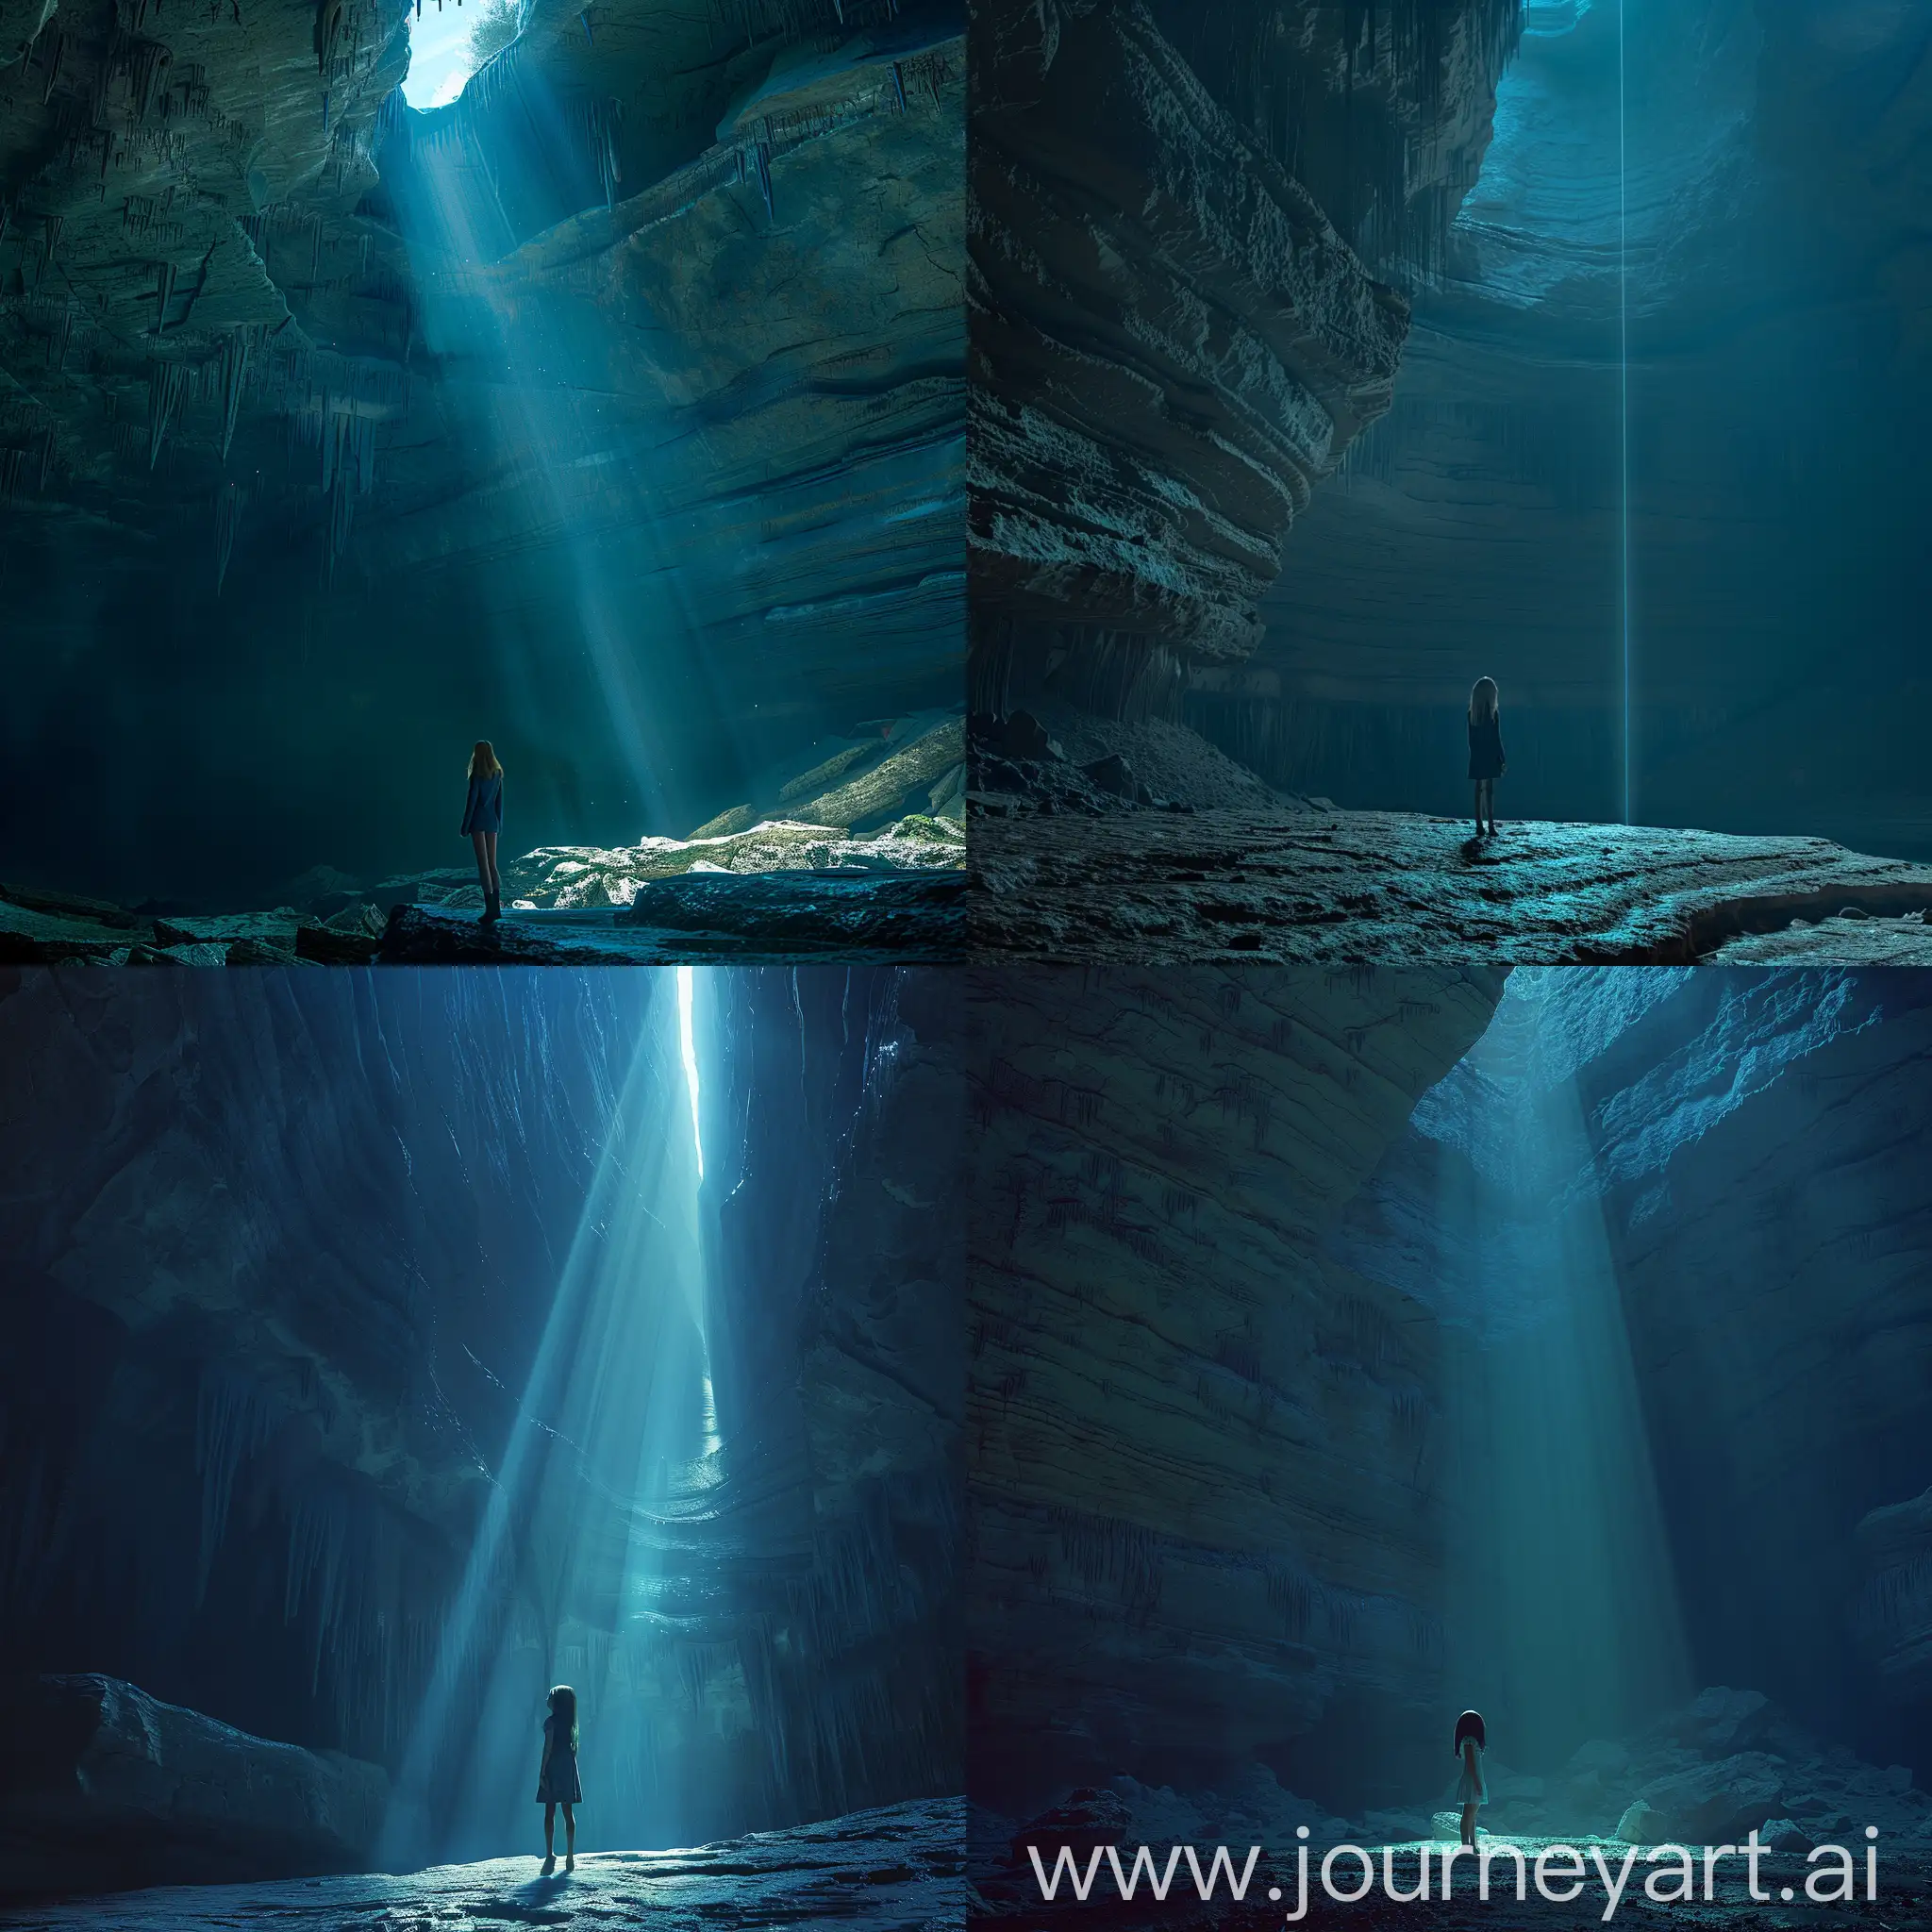 Girl-Contemplating-in-Dimly-Lit-Karst-Cave-with-Epic-SciFi-Scenes